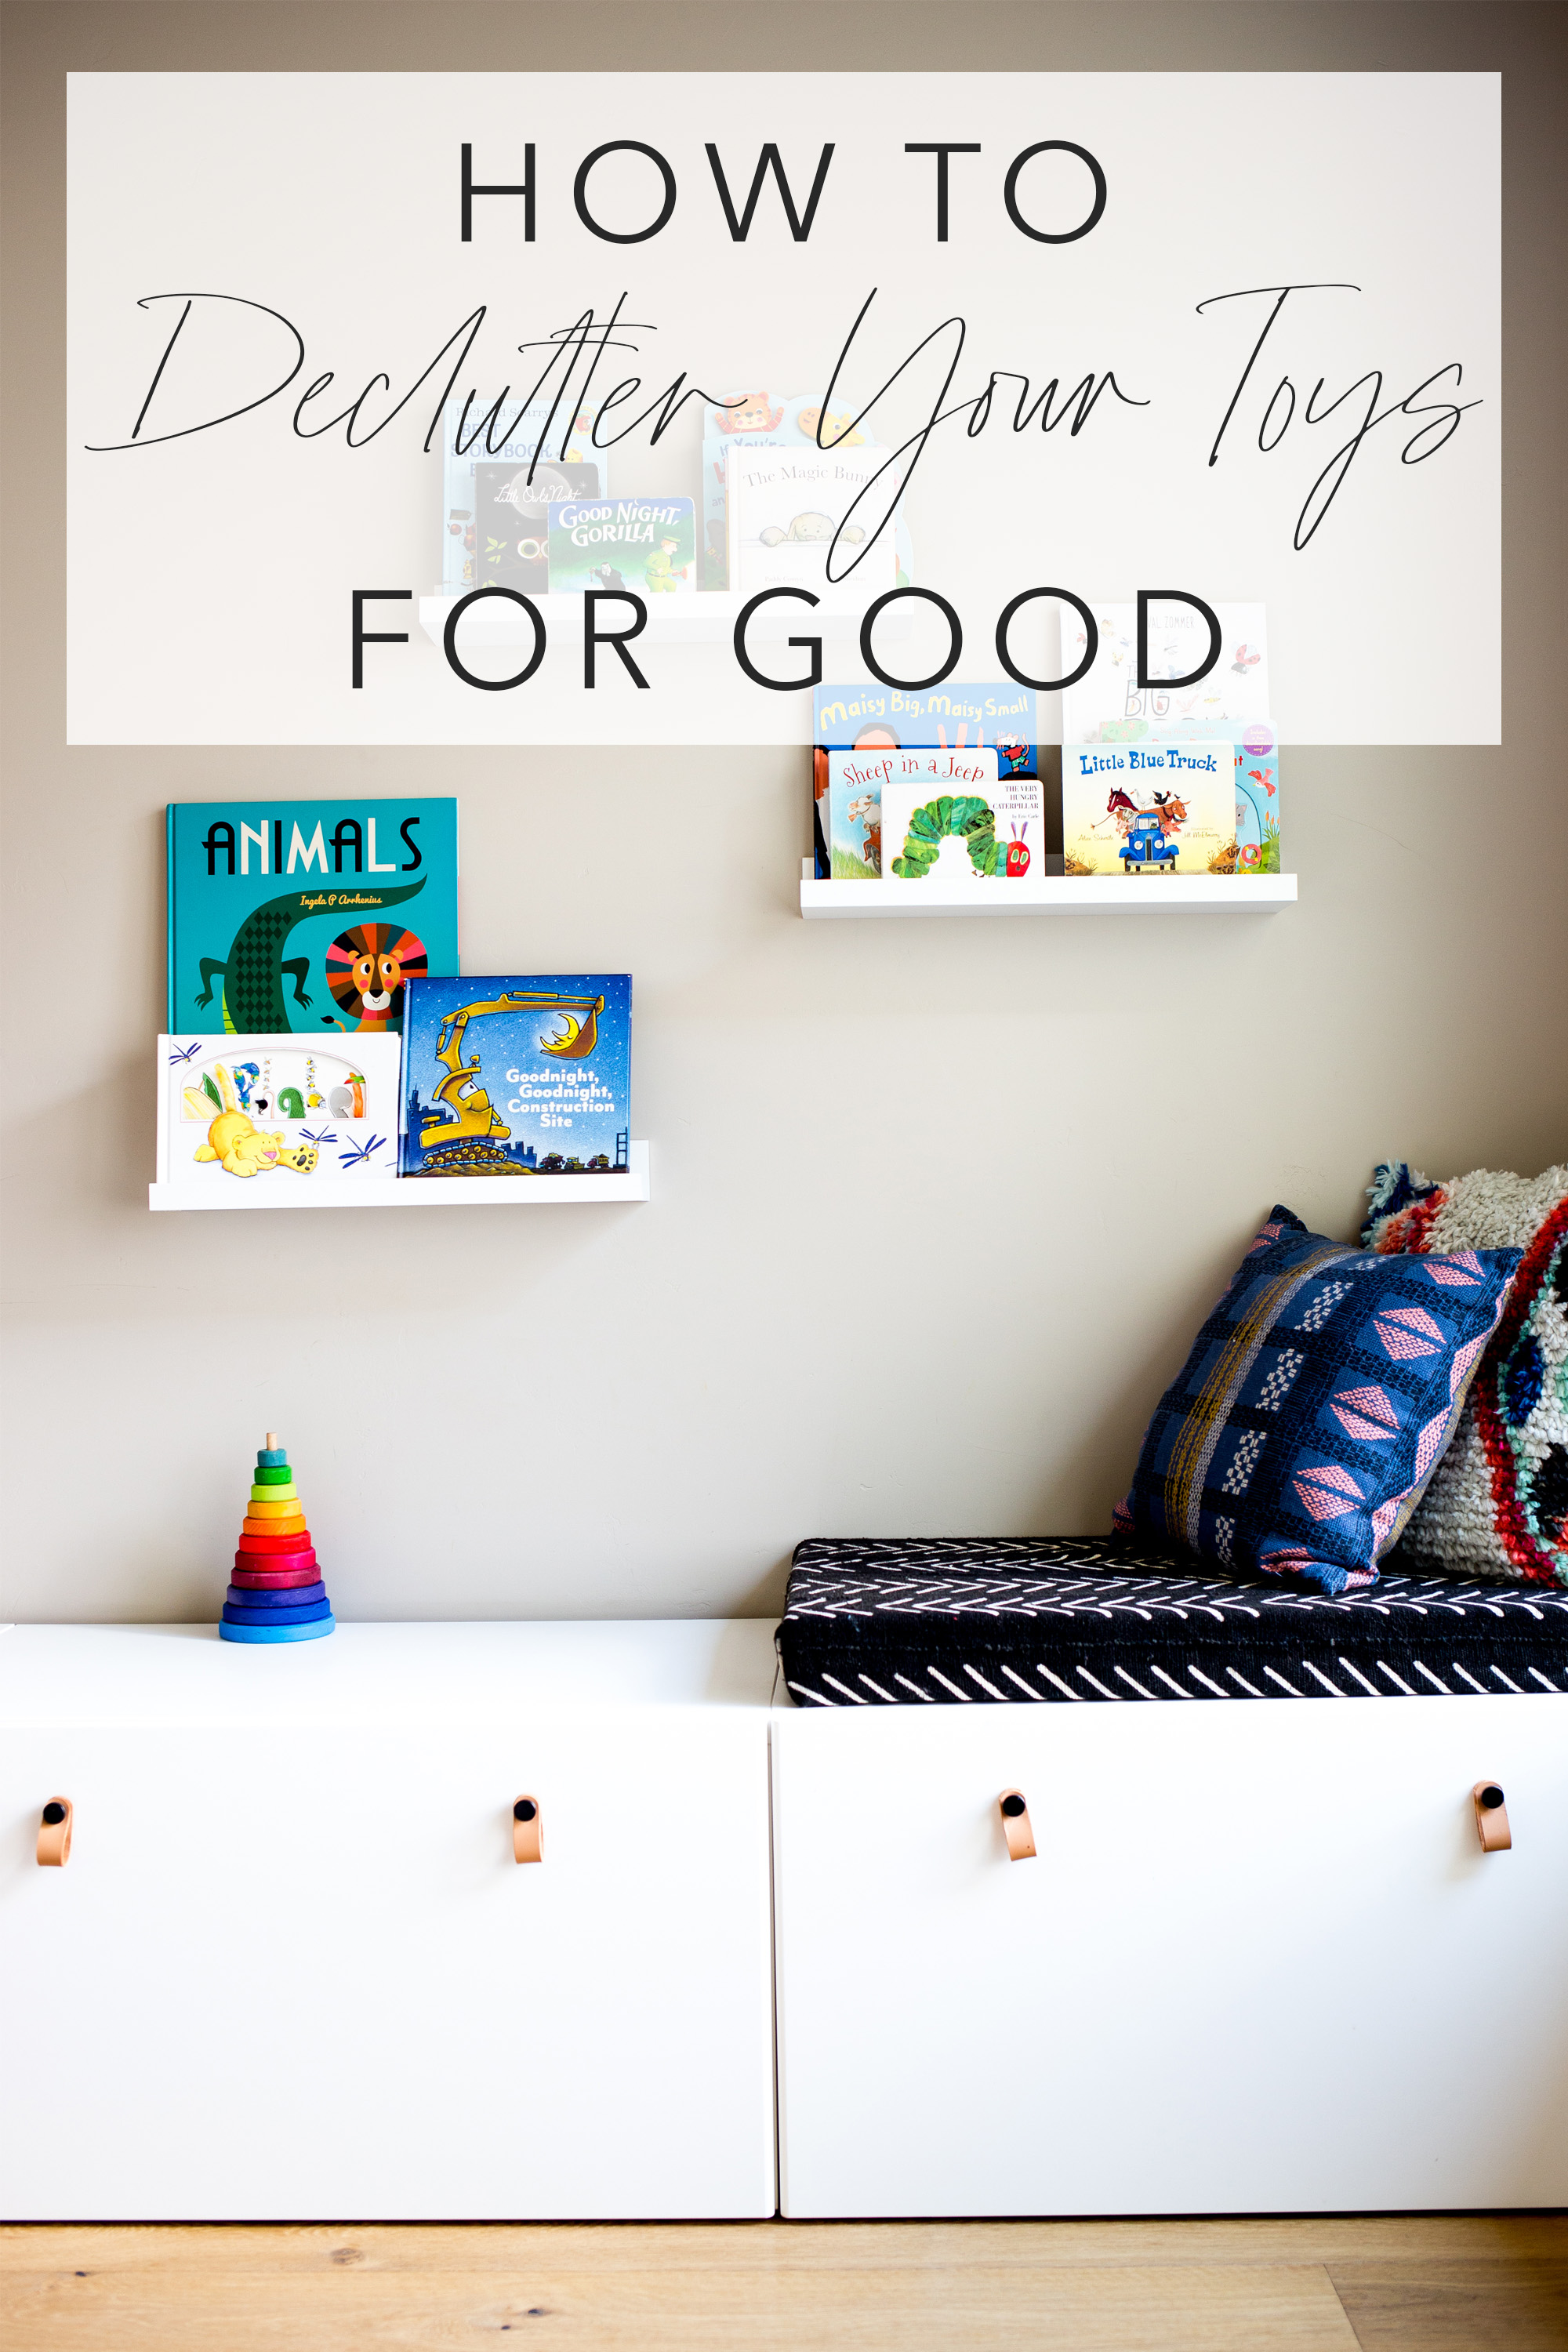 Play room with white modern toy storage bench IKEA and floating white shelves with kids books and title text "how to declutter your toys for good"